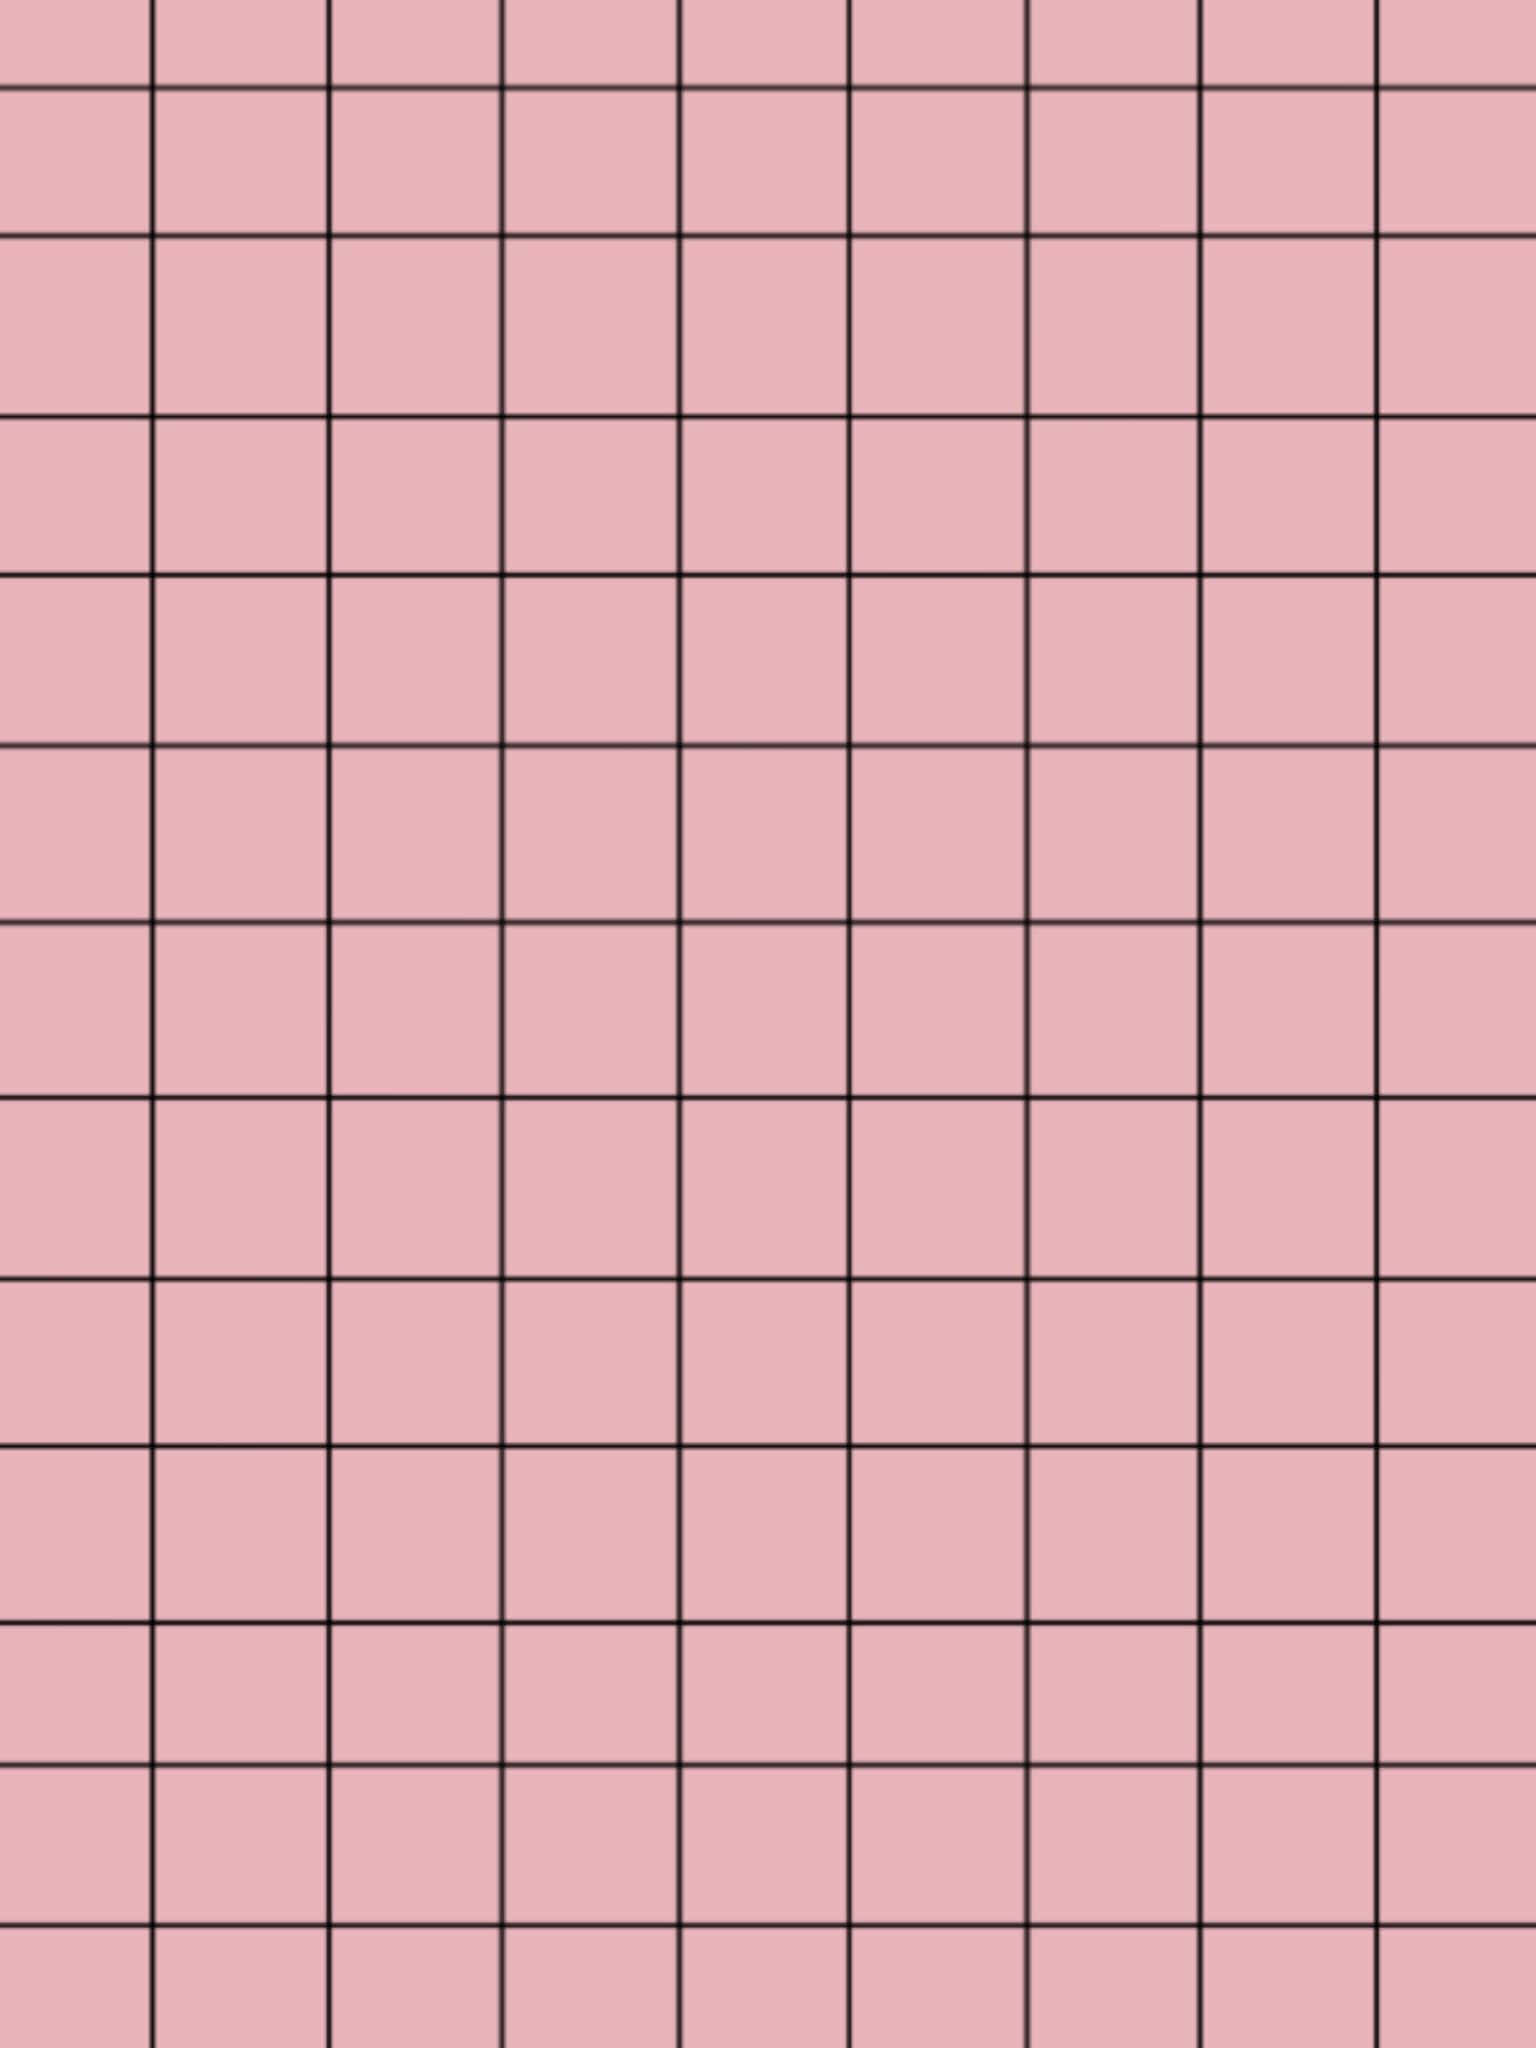 A Magical Pastel Aesthetic Grid